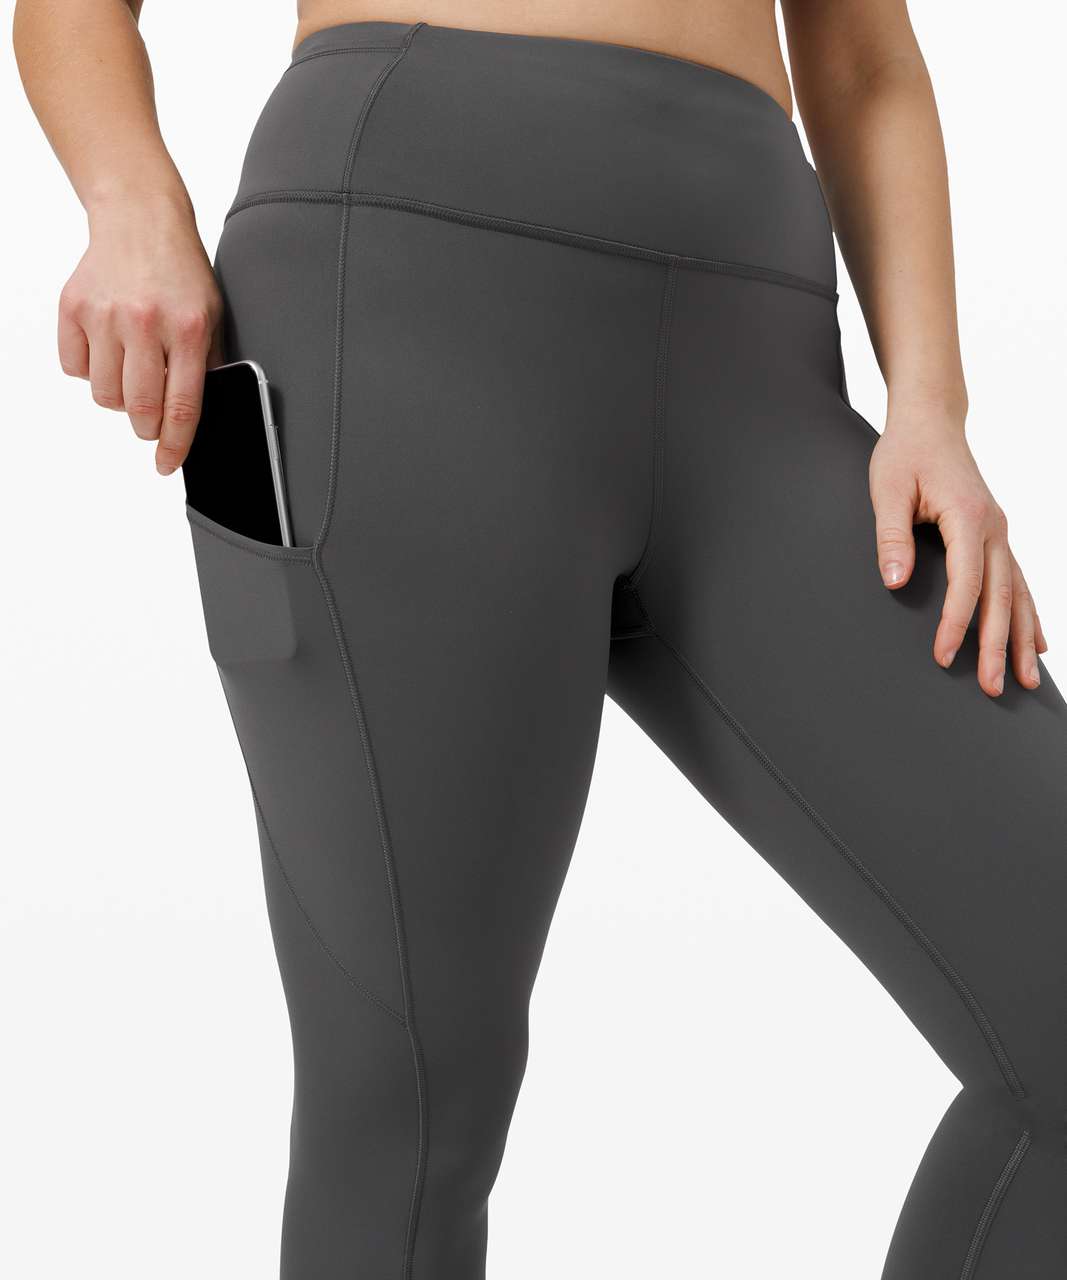 Lululemon Fast and Free Tight 28 *Non-Reflective - Graphite Grey